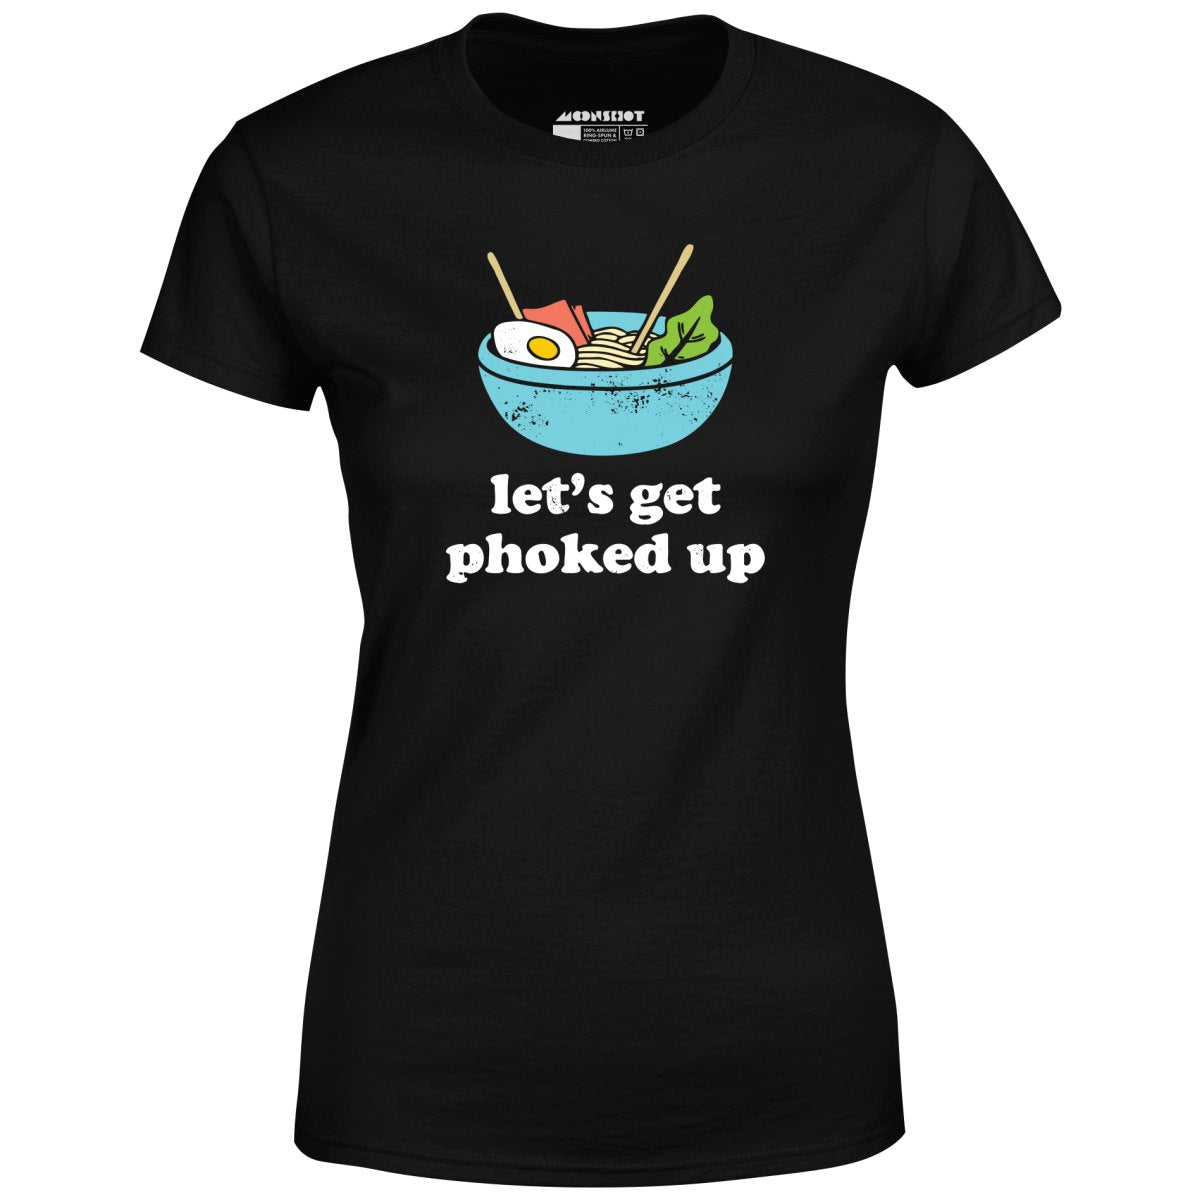 Let's Get Phoked Up - Women's T-Shirt